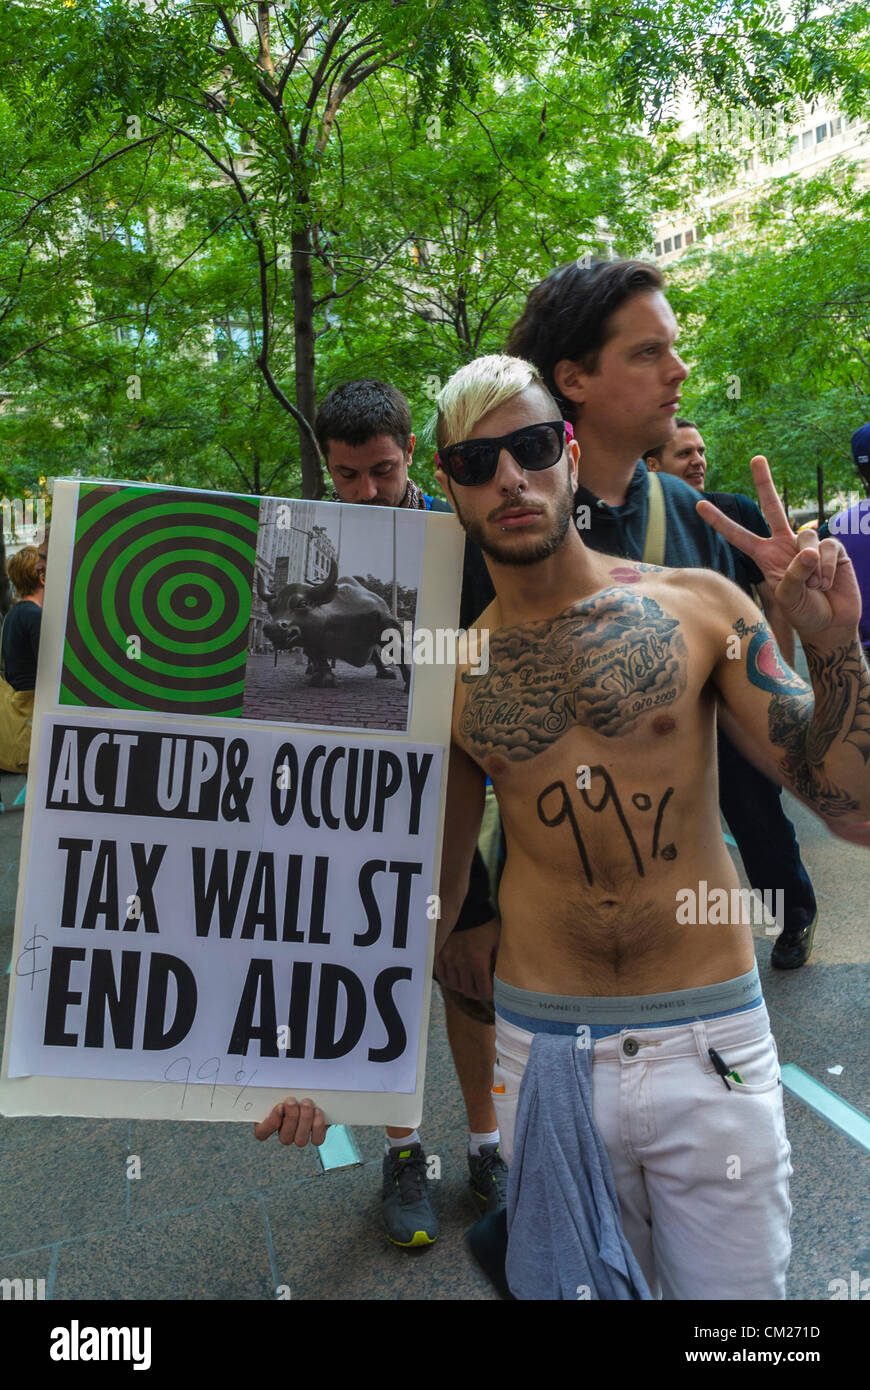 New York,NY, USA, protesters Holding Protest Signs, Protest, 'Occupy Wall Street', 'Act Up New York' AIDS hiv Activist, act up poster, political participation youth Stock Photo